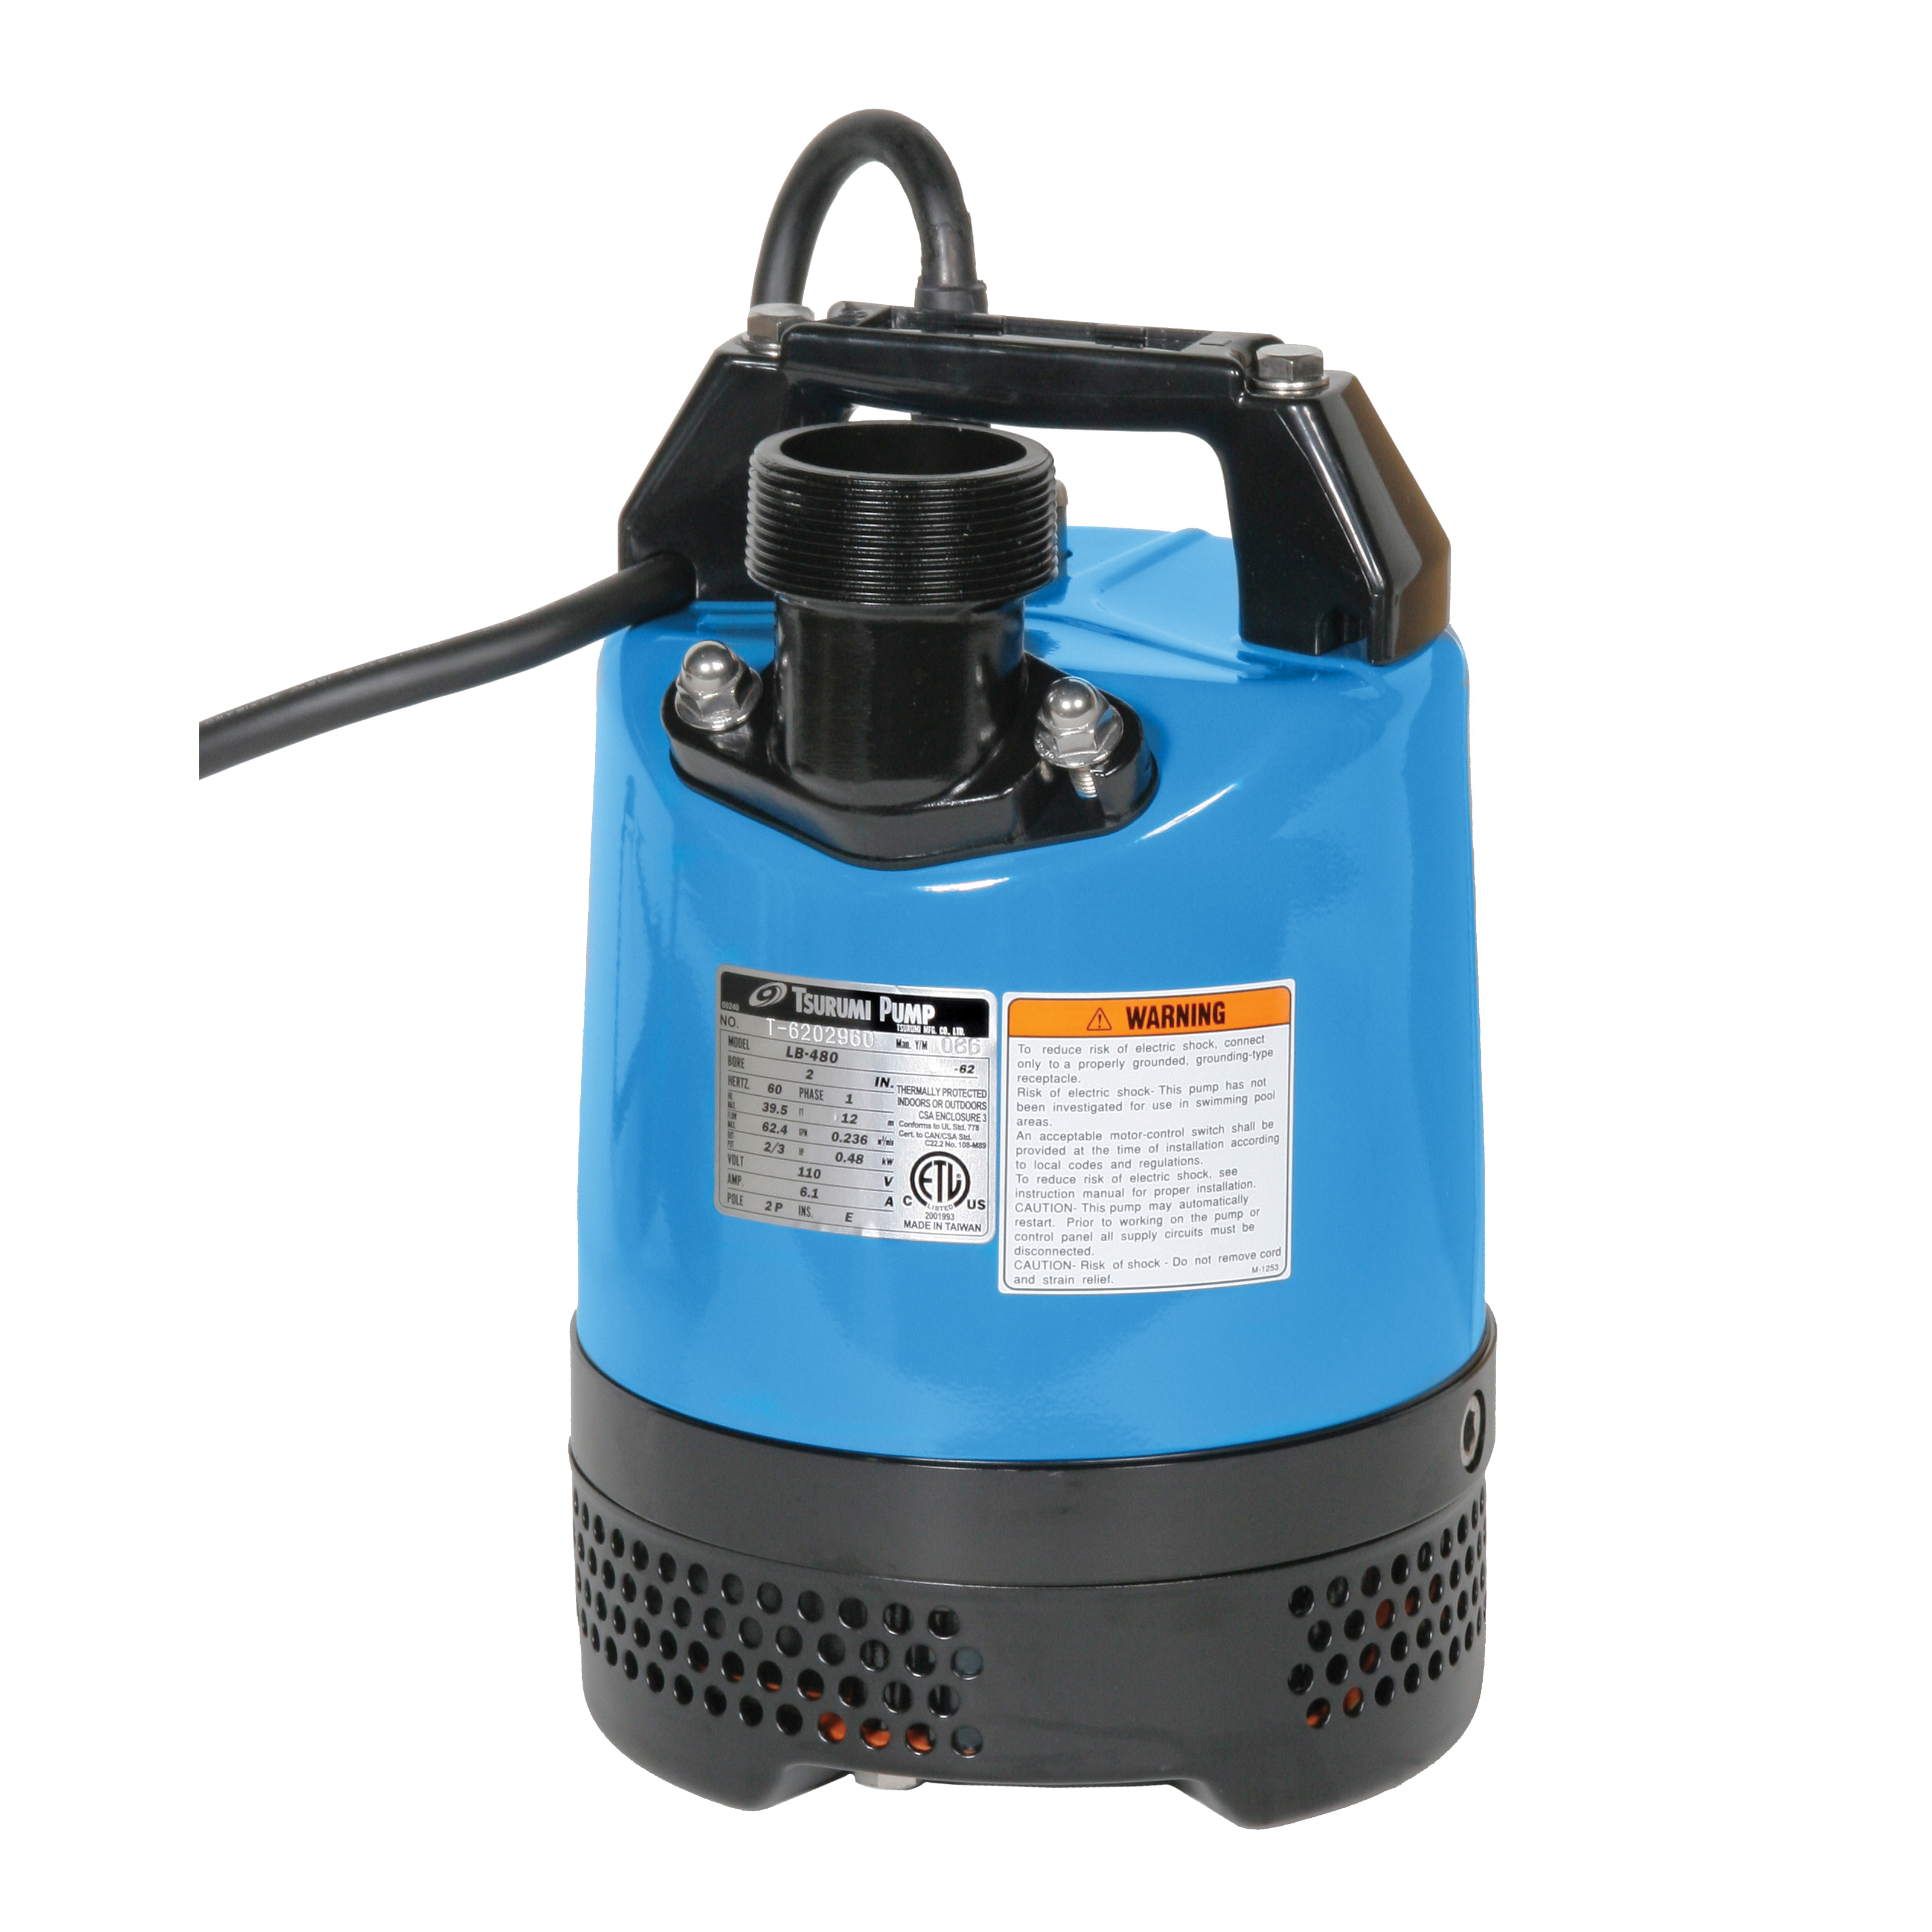 LB-480-62 Submersible Pump, 1-Phase, 6.1 A, 115/230 V, 0.66 hp, 2 in Outlet, 39-1/2 ft Max Head, 15.9 gpm